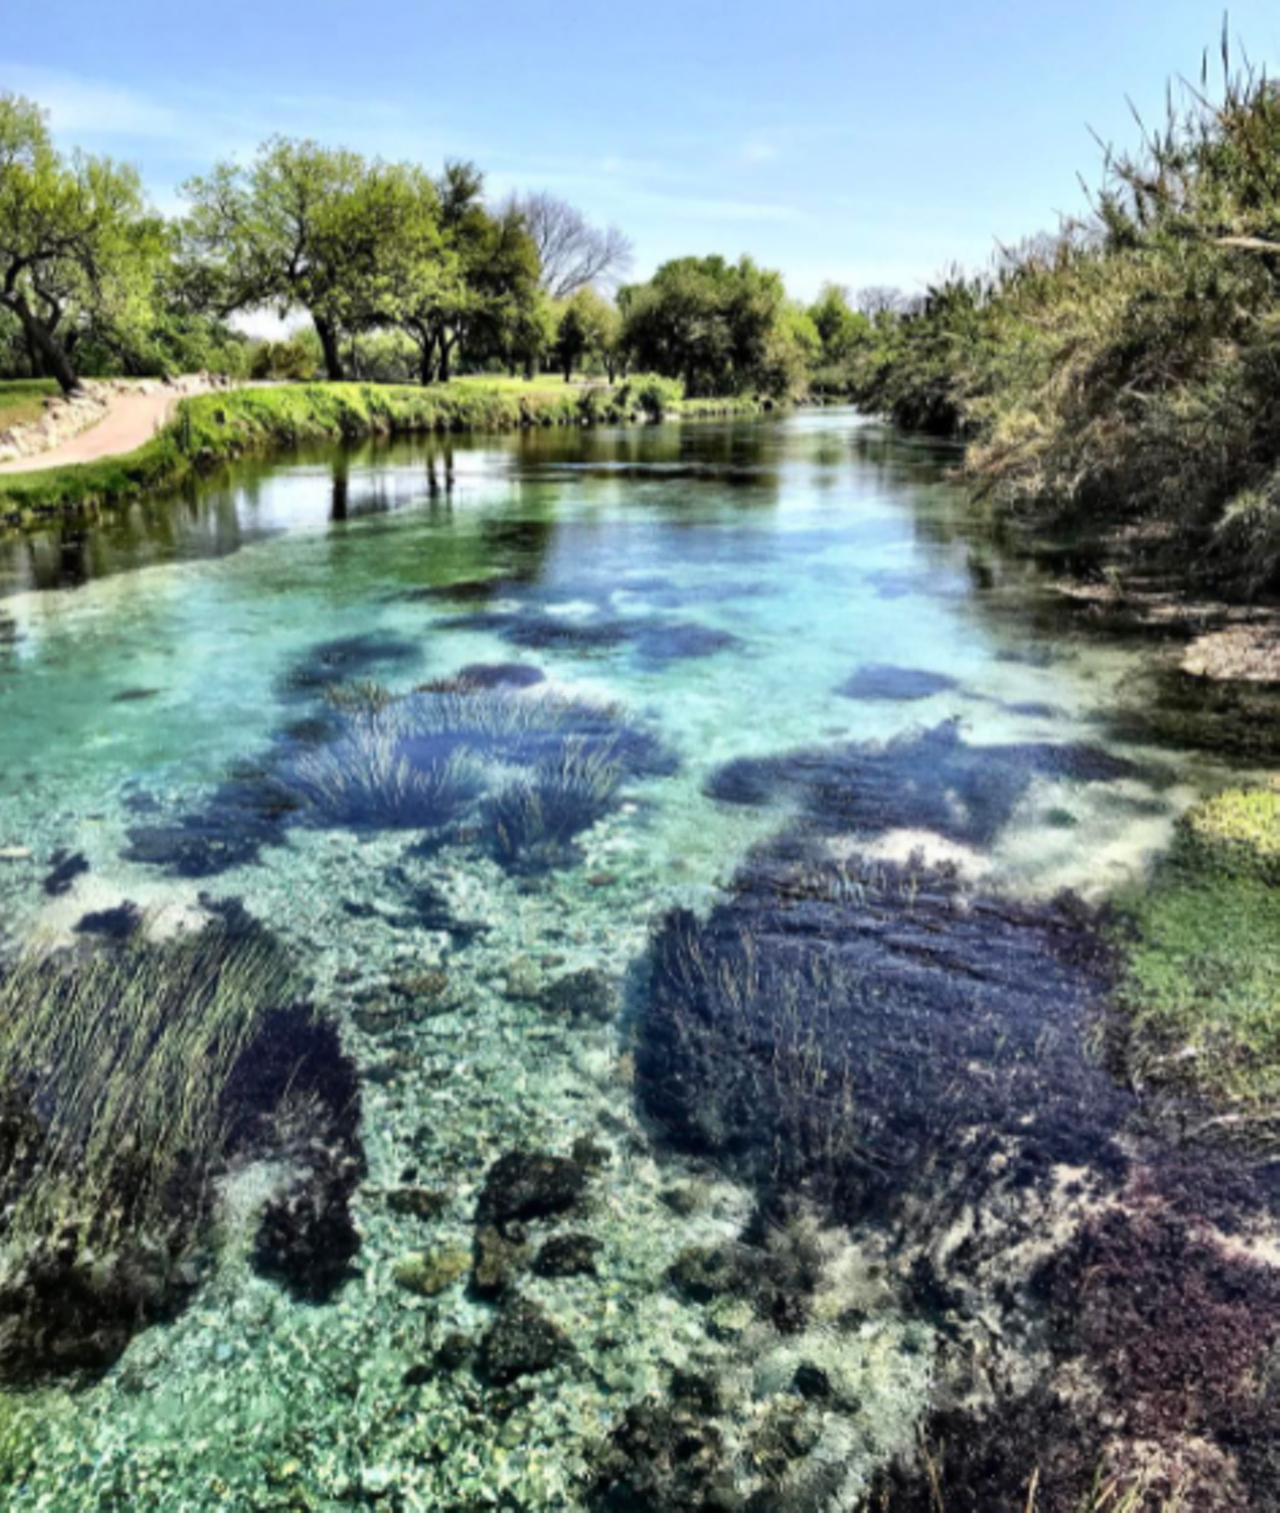 San Felipe Springs
Del Rio, edwardsaquifer.net
San Felipe Springs are the fourth-largest in the state, and the crystalline waters a great swimming spot if you’re near the border.
Photo via Instagram / relleyyy